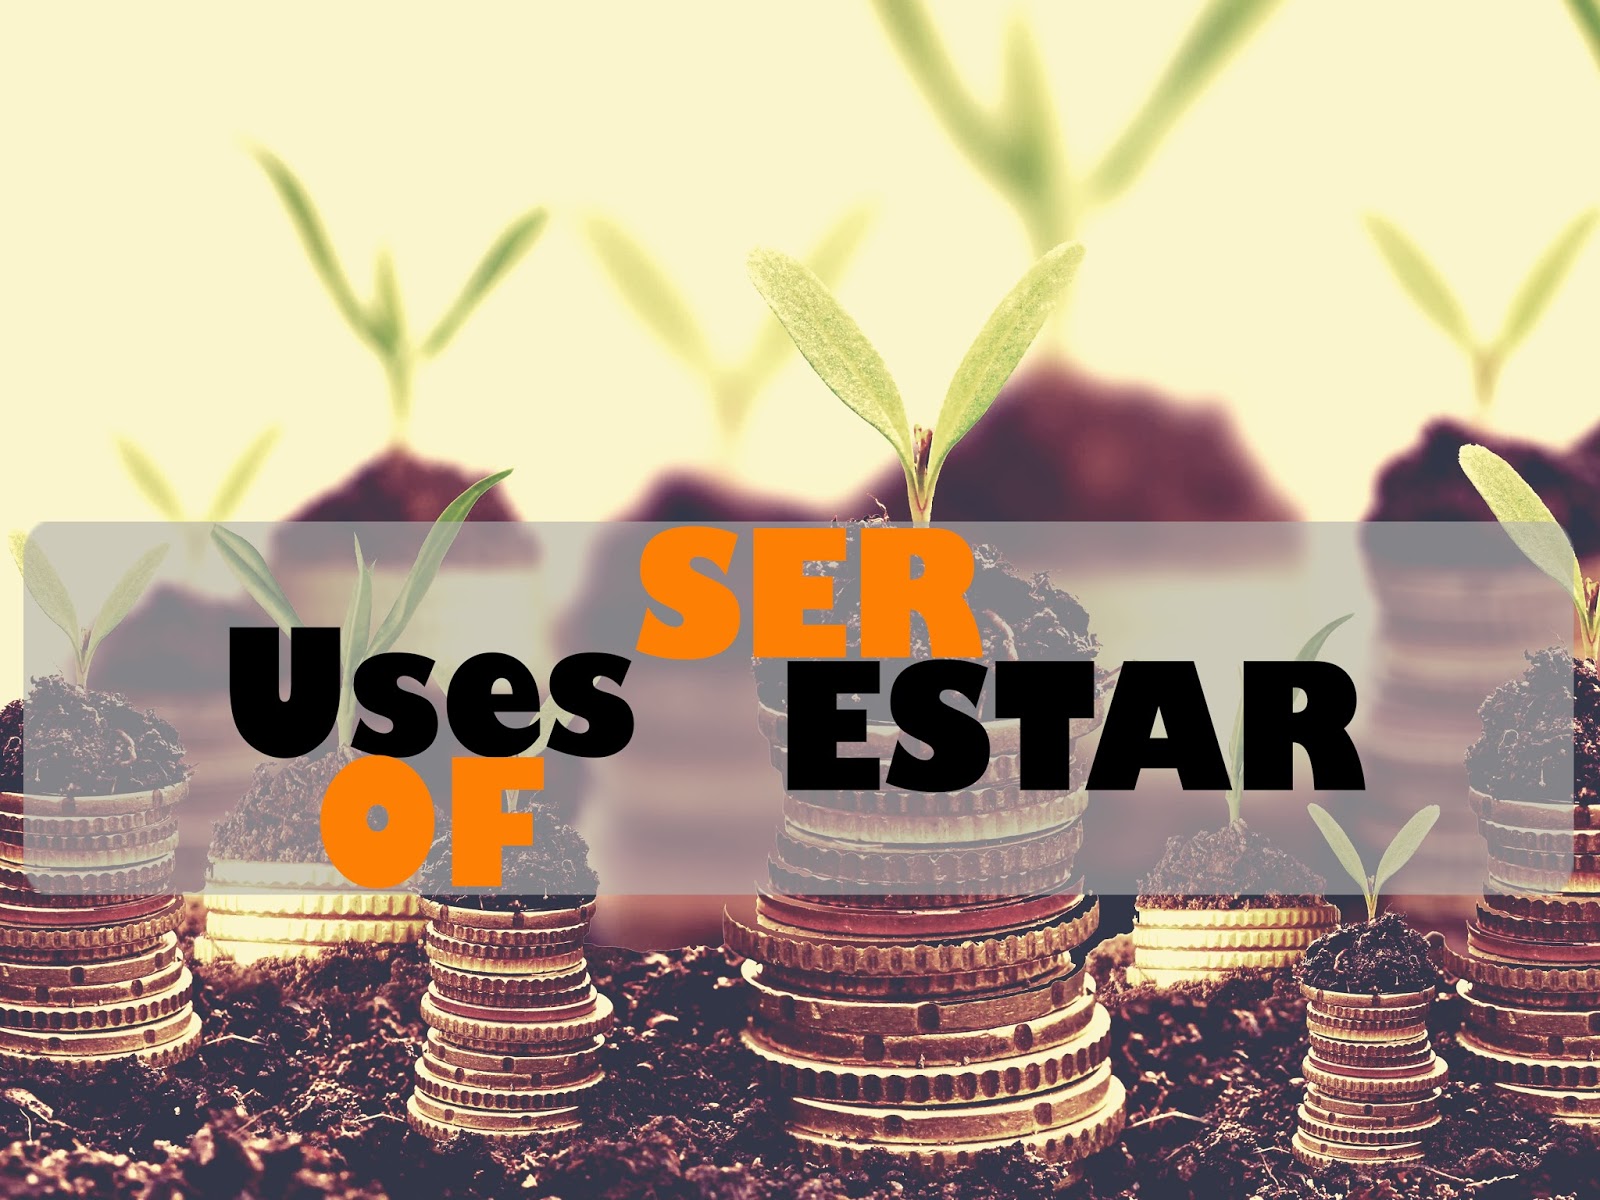 uses-of-ser-vs-estar-the-difference-between-ser-and-estar